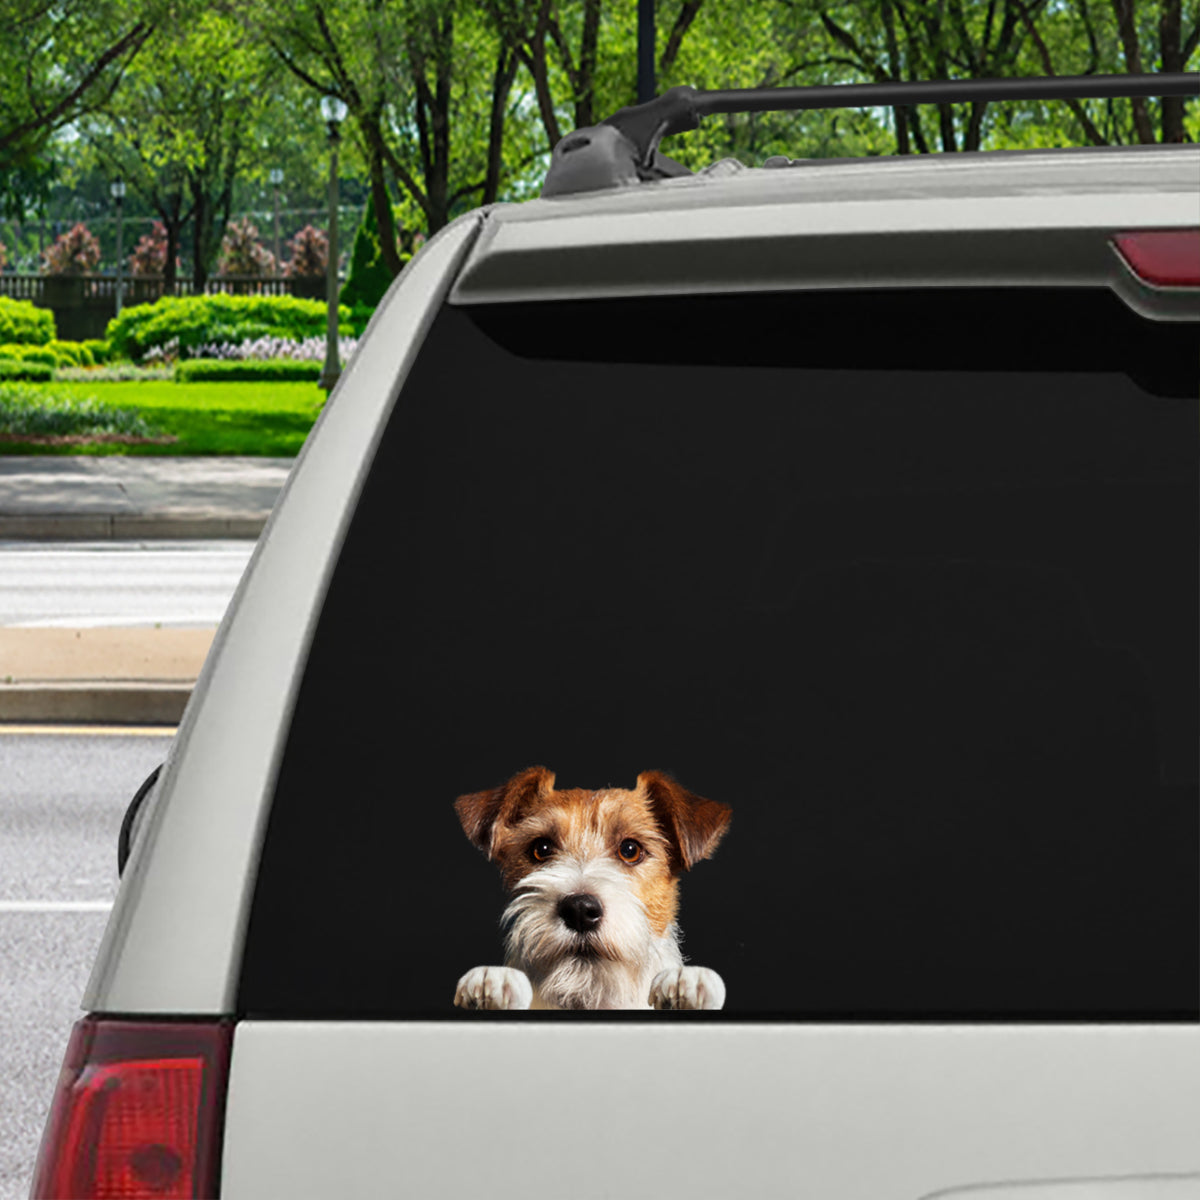 Can You See Me Now - Jack Russell Terrier Sticker V4